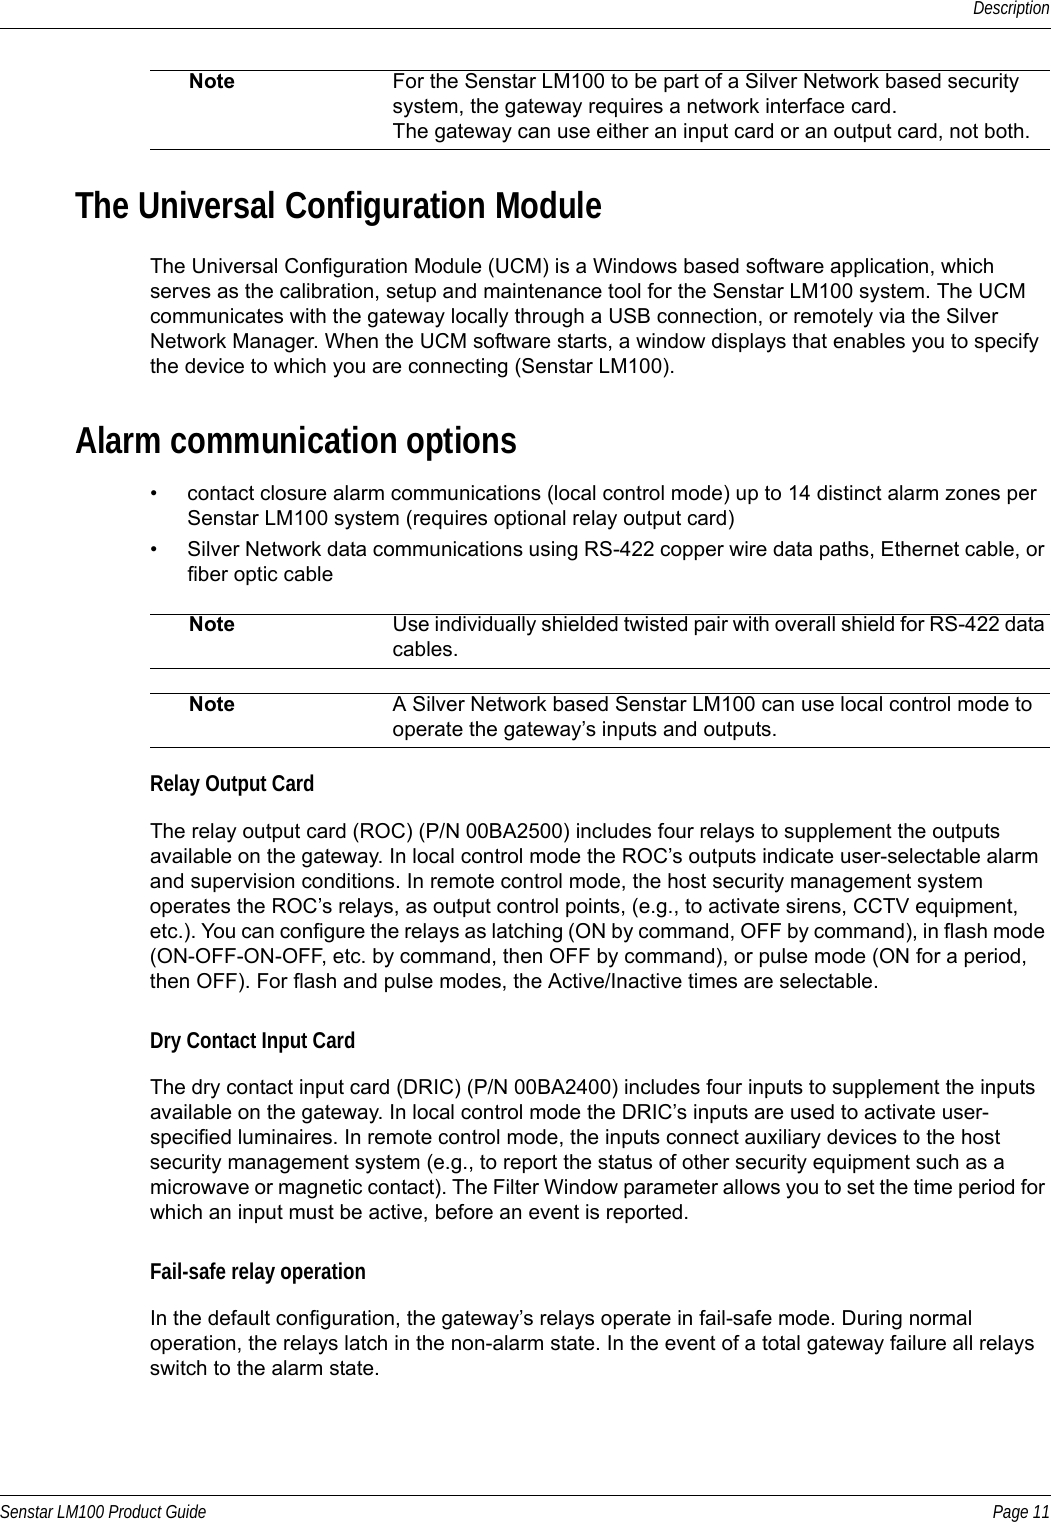 DescriptionSenstar LM100 Product Guide Page 11The Universal Configuration ModuleThe Universal Configuration Module (UCM) is a Windows based software application, which serves as the calibration, setup and maintenance tool for the Senstar LM100 system. The UCM communicates with the gateway locally through a USB connection, or remotely via the Silver Network Manager. When the UCM software starts, a window displays that enables you to specify the device to which you are connecting (Senstar LM100).Alarm communication options• contact closure alarm communications (local control mode) up to 14 distinct alarm zones per Senstar LM100 system (requires optional relay output card)• Silver Network data communications using RS-422 copper wire data paths, Ethernet cable, or fiber optic cableRelay Output CardThe relay output card (ROC) (P/N 00BA2500) includes four relays to supplement the outputs available on the gateway. In local control mode the ROC’s outputs indicate user-selectable alarm and supervision conditions. In remote control mode, the host security management system operates the ROC’s relays, as output control points, (e.g., to activate sirens, CCTV equipment, etc.). You can configure the relays as latching (ON by command, OFF by command), in flash mode (ON-OFF-ON-OFF, etc. by command, then OFF by command), or pulse mode (ON for a period, then OFF). For flash and pulse modes, the Active/Inactive times are selectable.Dry Contact Input CardThe dry contact input card (DRIC) (P/N 00BA2400) includes four inputs to supplement the inputs available on the gateway. In local control mode the DRIC’s inputs are used to activate user-specified luminaires. In remote control mode, the inputs connect auxiliary devices to the host security management system (e.g., to report the status of other security equipment such as a microwave or magnetic contact). The Filter Window parameter allows you to set the time period for which an input must be active, before an event is reported.Fail-safe relay operationIn the default configuration, the gateway’s relays operate in fail-safe mode. During normal operation, the relays latch in the non-alarm state. In the event of a total gateway failure all relays switch to the alarm state. Note For the Senstar LM100 to be part of a Silver Network based security system, the gateway requires a network interface card.The gateway can use either an input card or an output card, not both.Note Use individually shielded twisted pair with overall shield for RS-422 data cables.Note A Silver Network based Senstar LM100 can use local control mode to operate the gateway’s inputs and outputs.